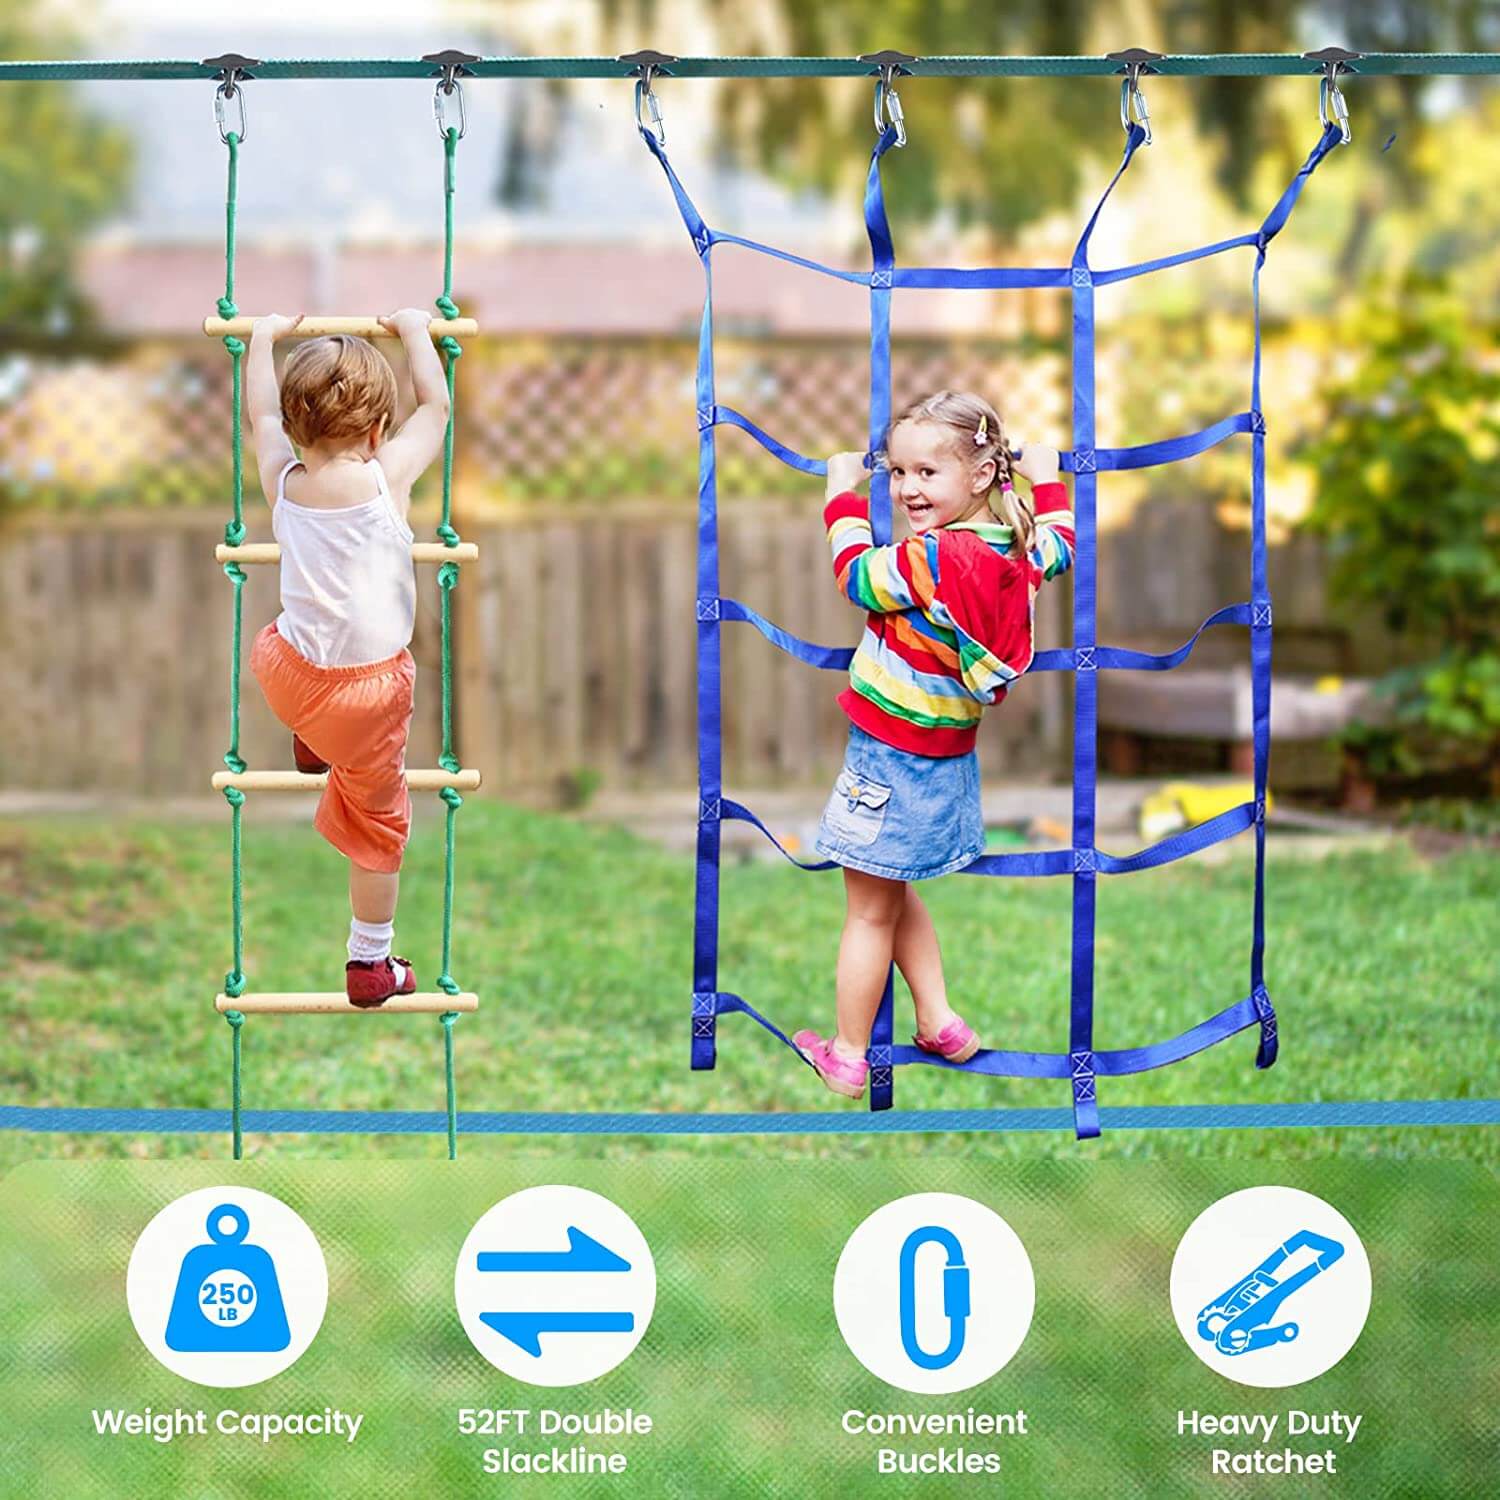 Ninja Warrior Obstacle Course for Kids with 12 Accessories for Backyard